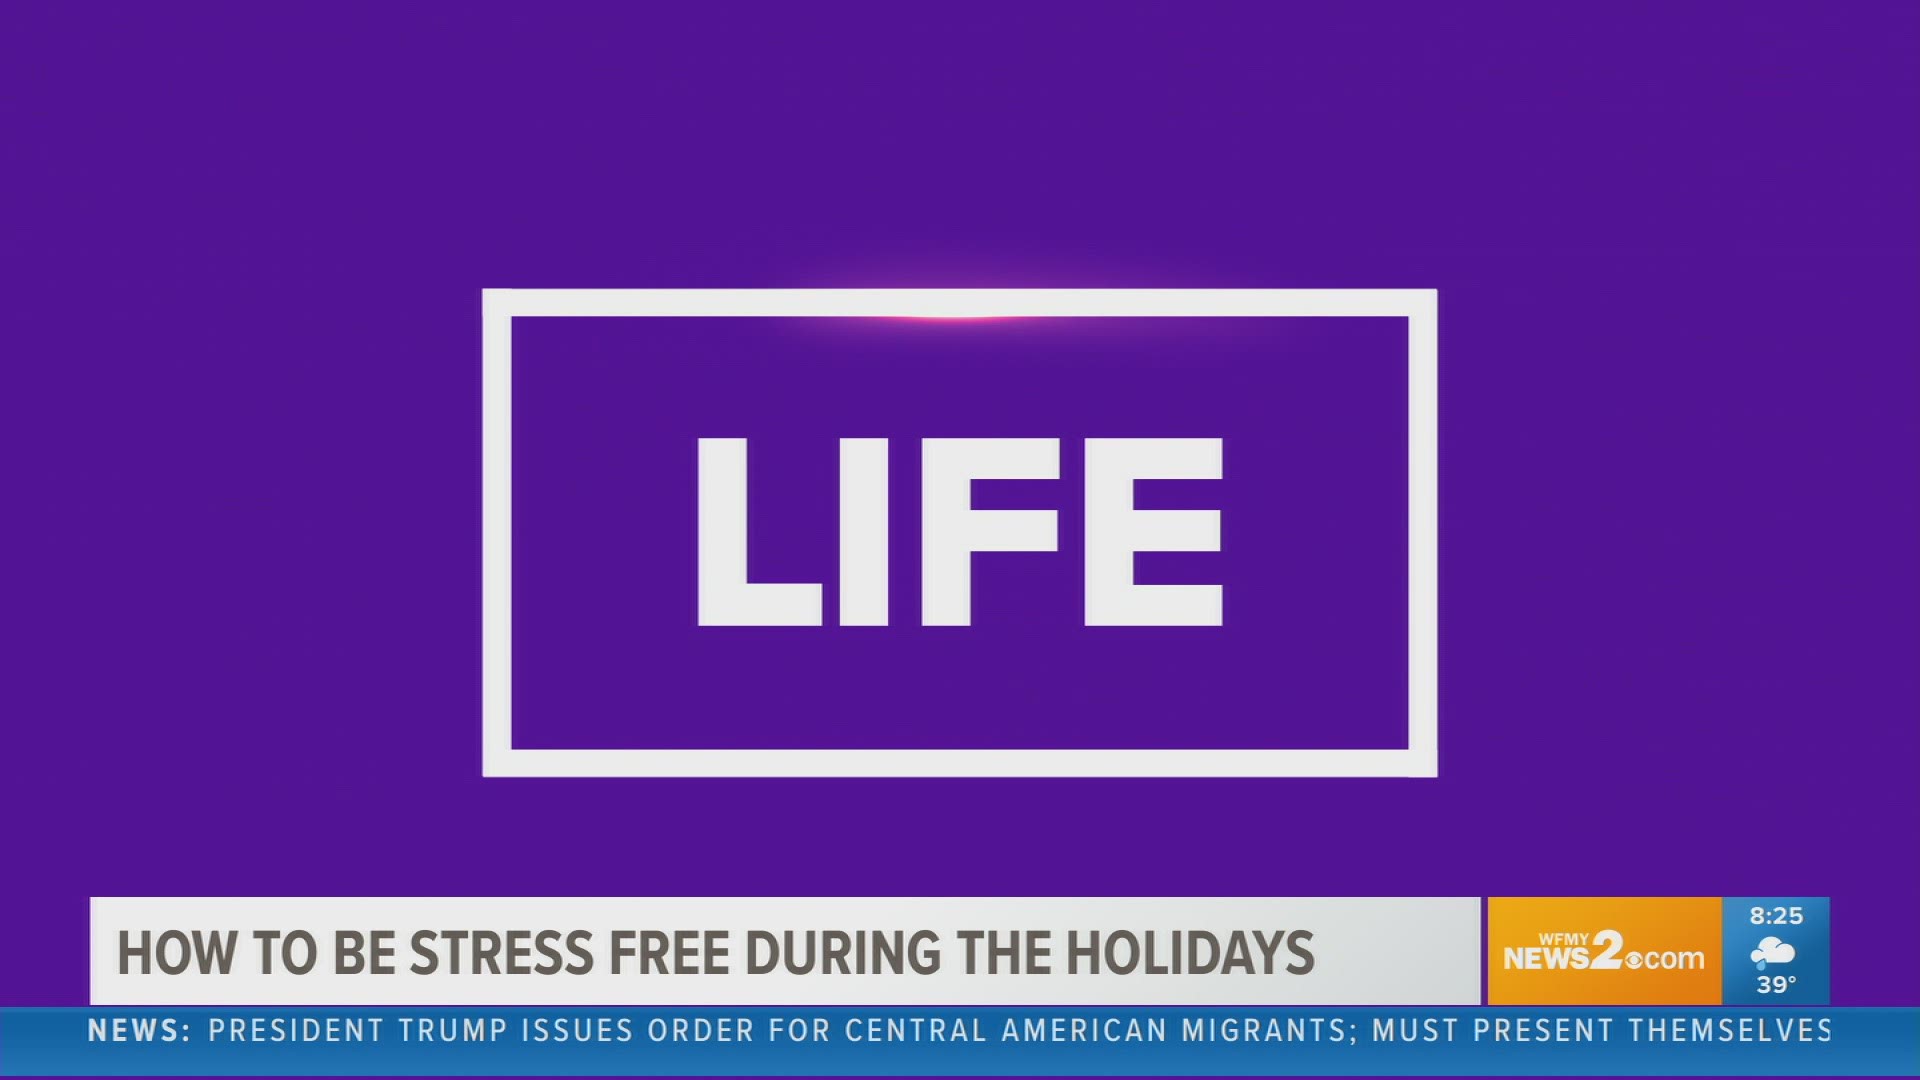 : Local Therapist Jill White-Huffman has the answer for avoiding stress this holiday season.